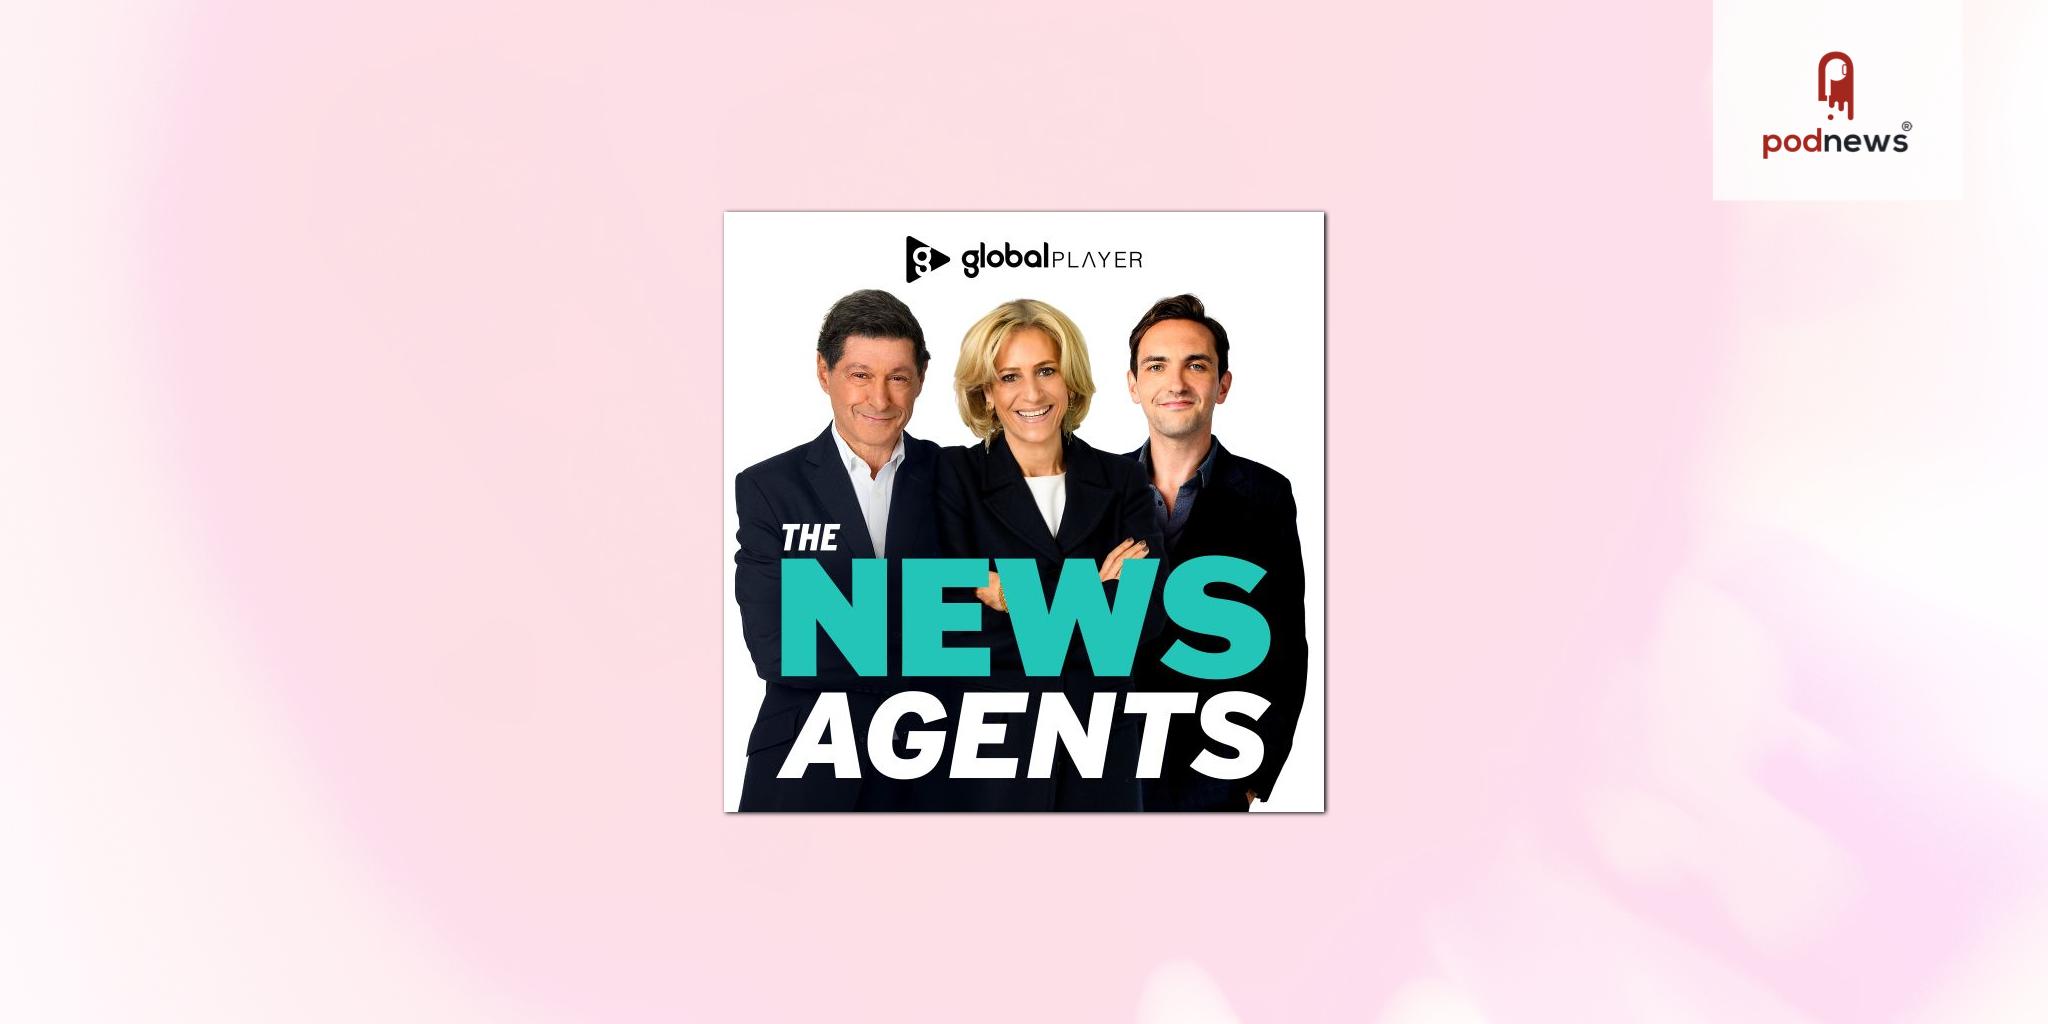 The News Agents podcast hits 24 million downloads in seven months